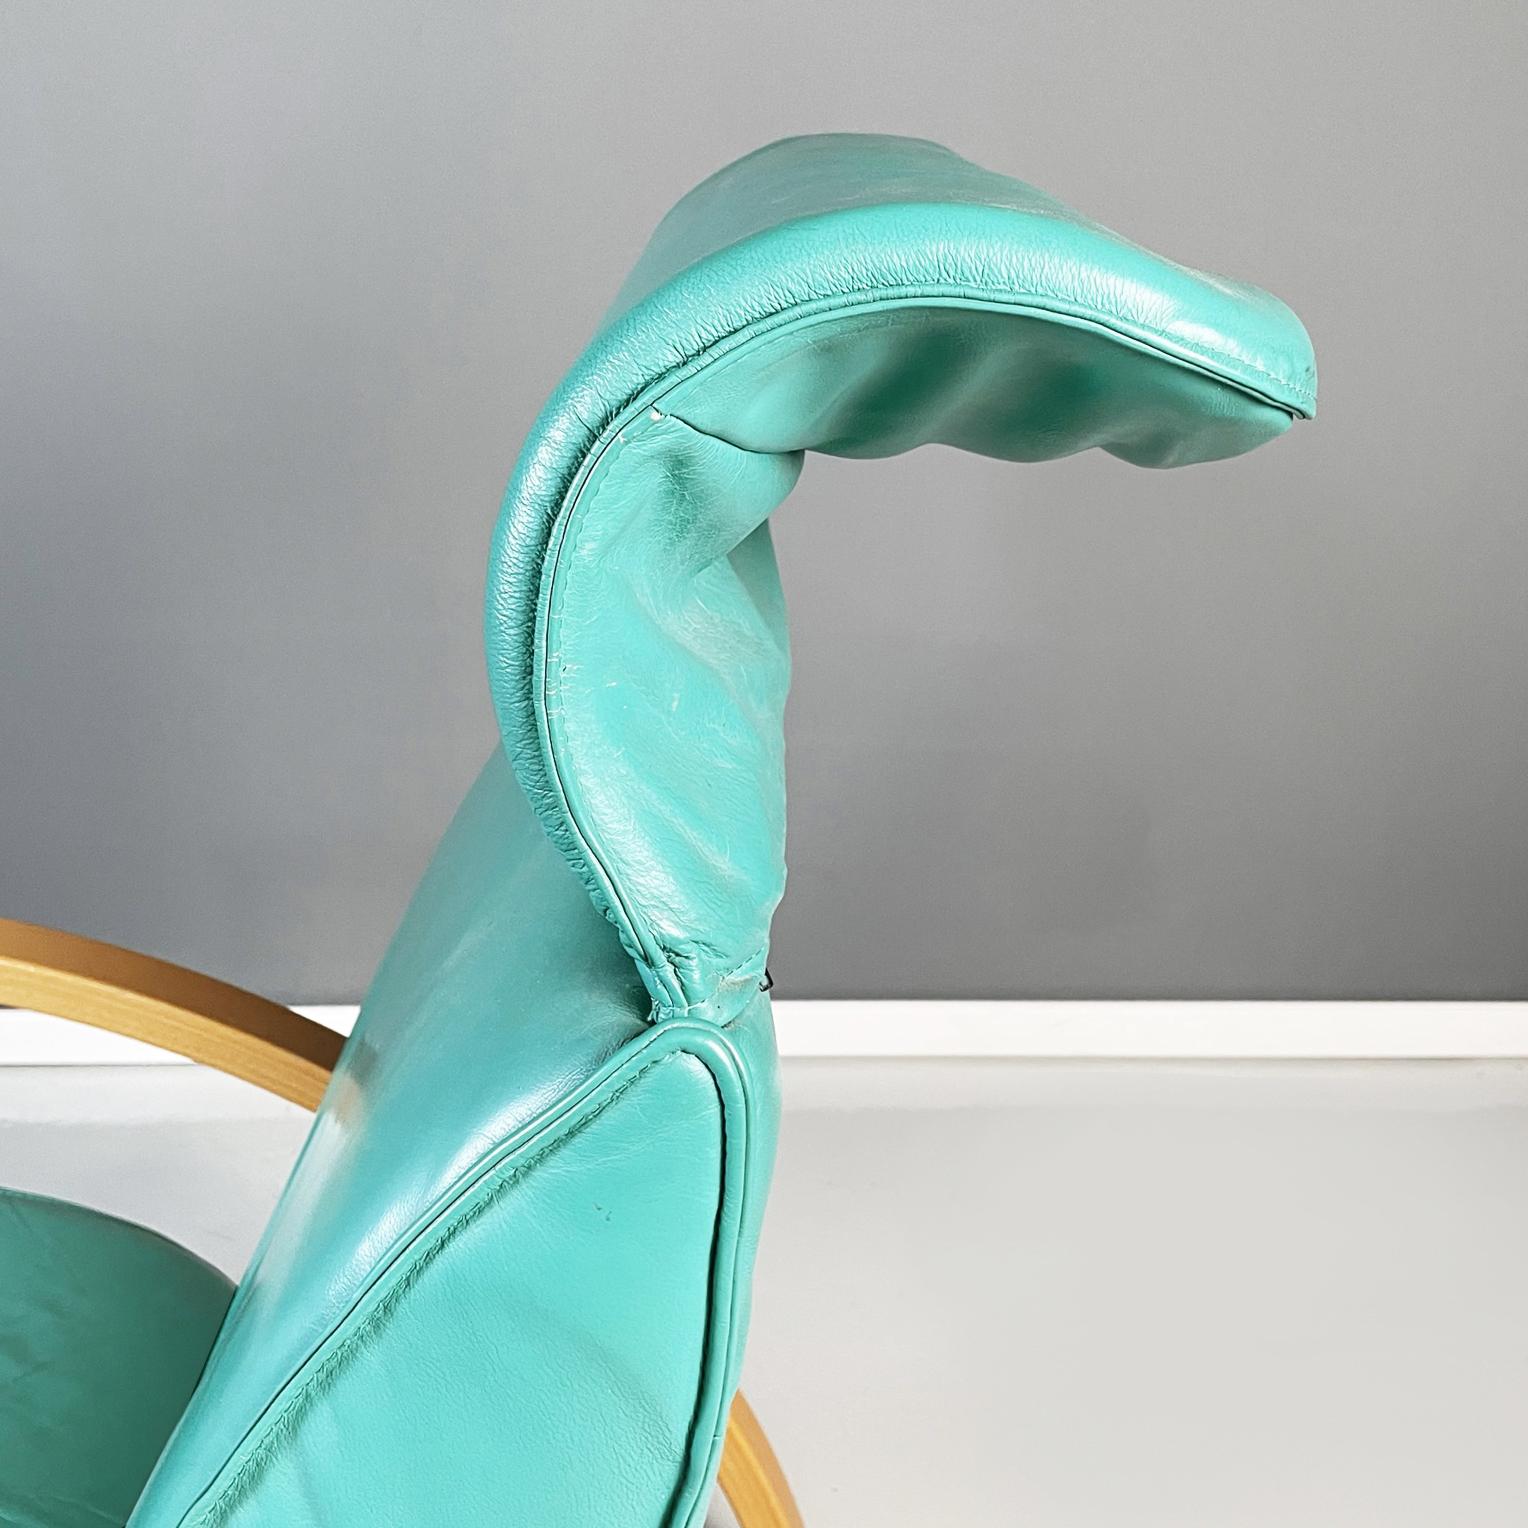 Italian Modern Armchair in Aqua-Green Leather, Wood and Metal, 1980s For Sale 11